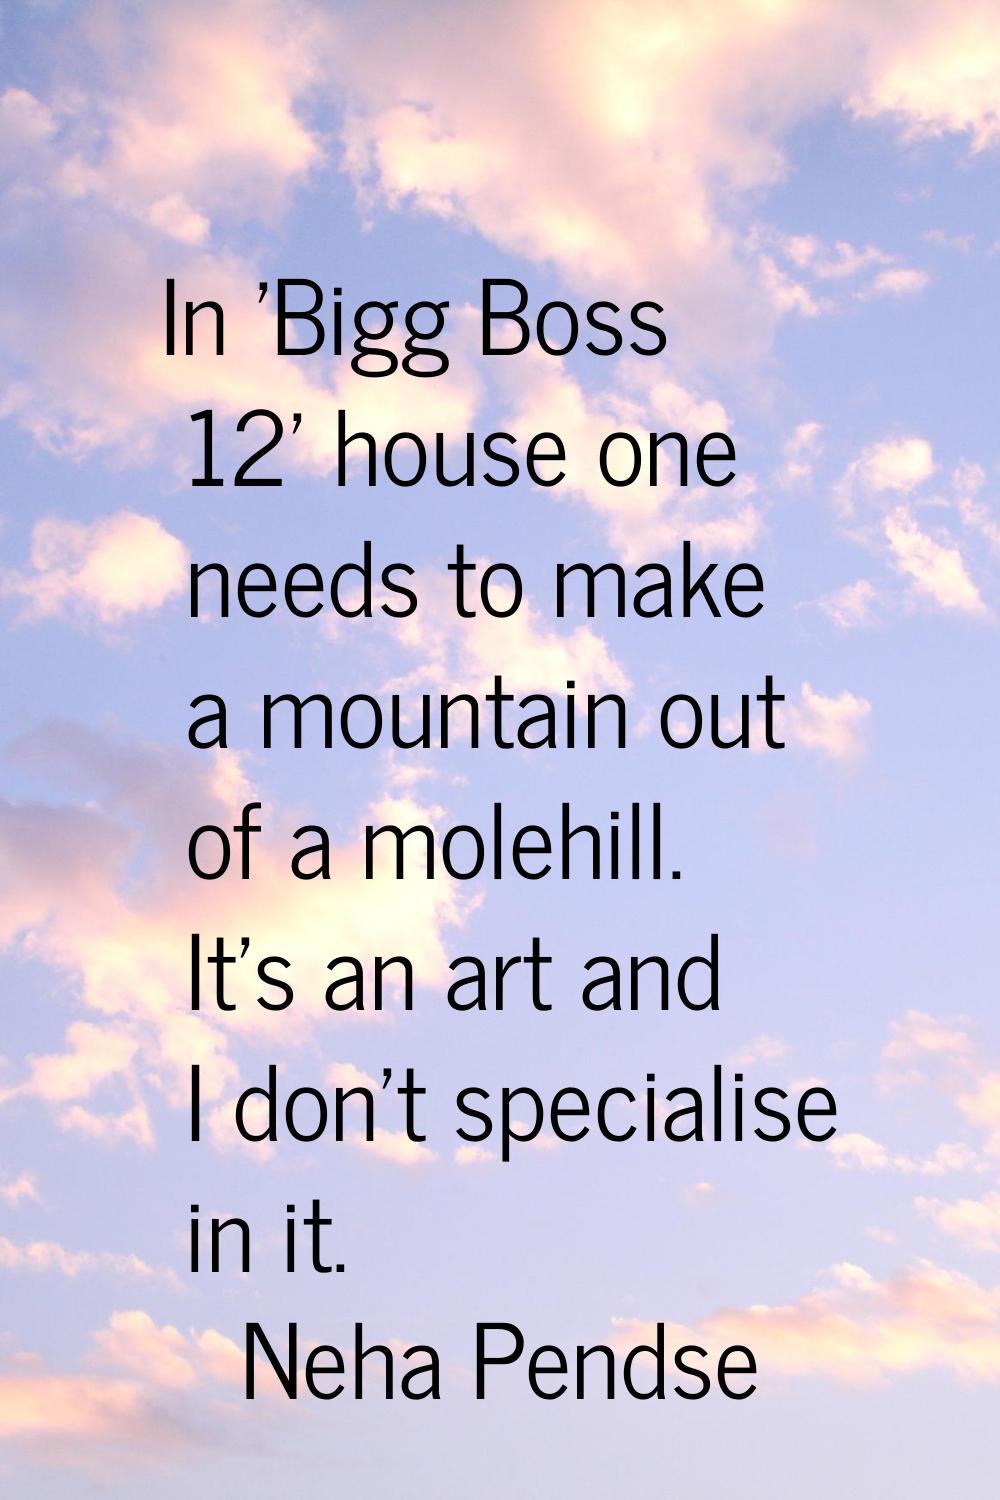 In 'Bigg Boss 12' house one needs to make a mountain out of a molehill. It's an art and I don't spe